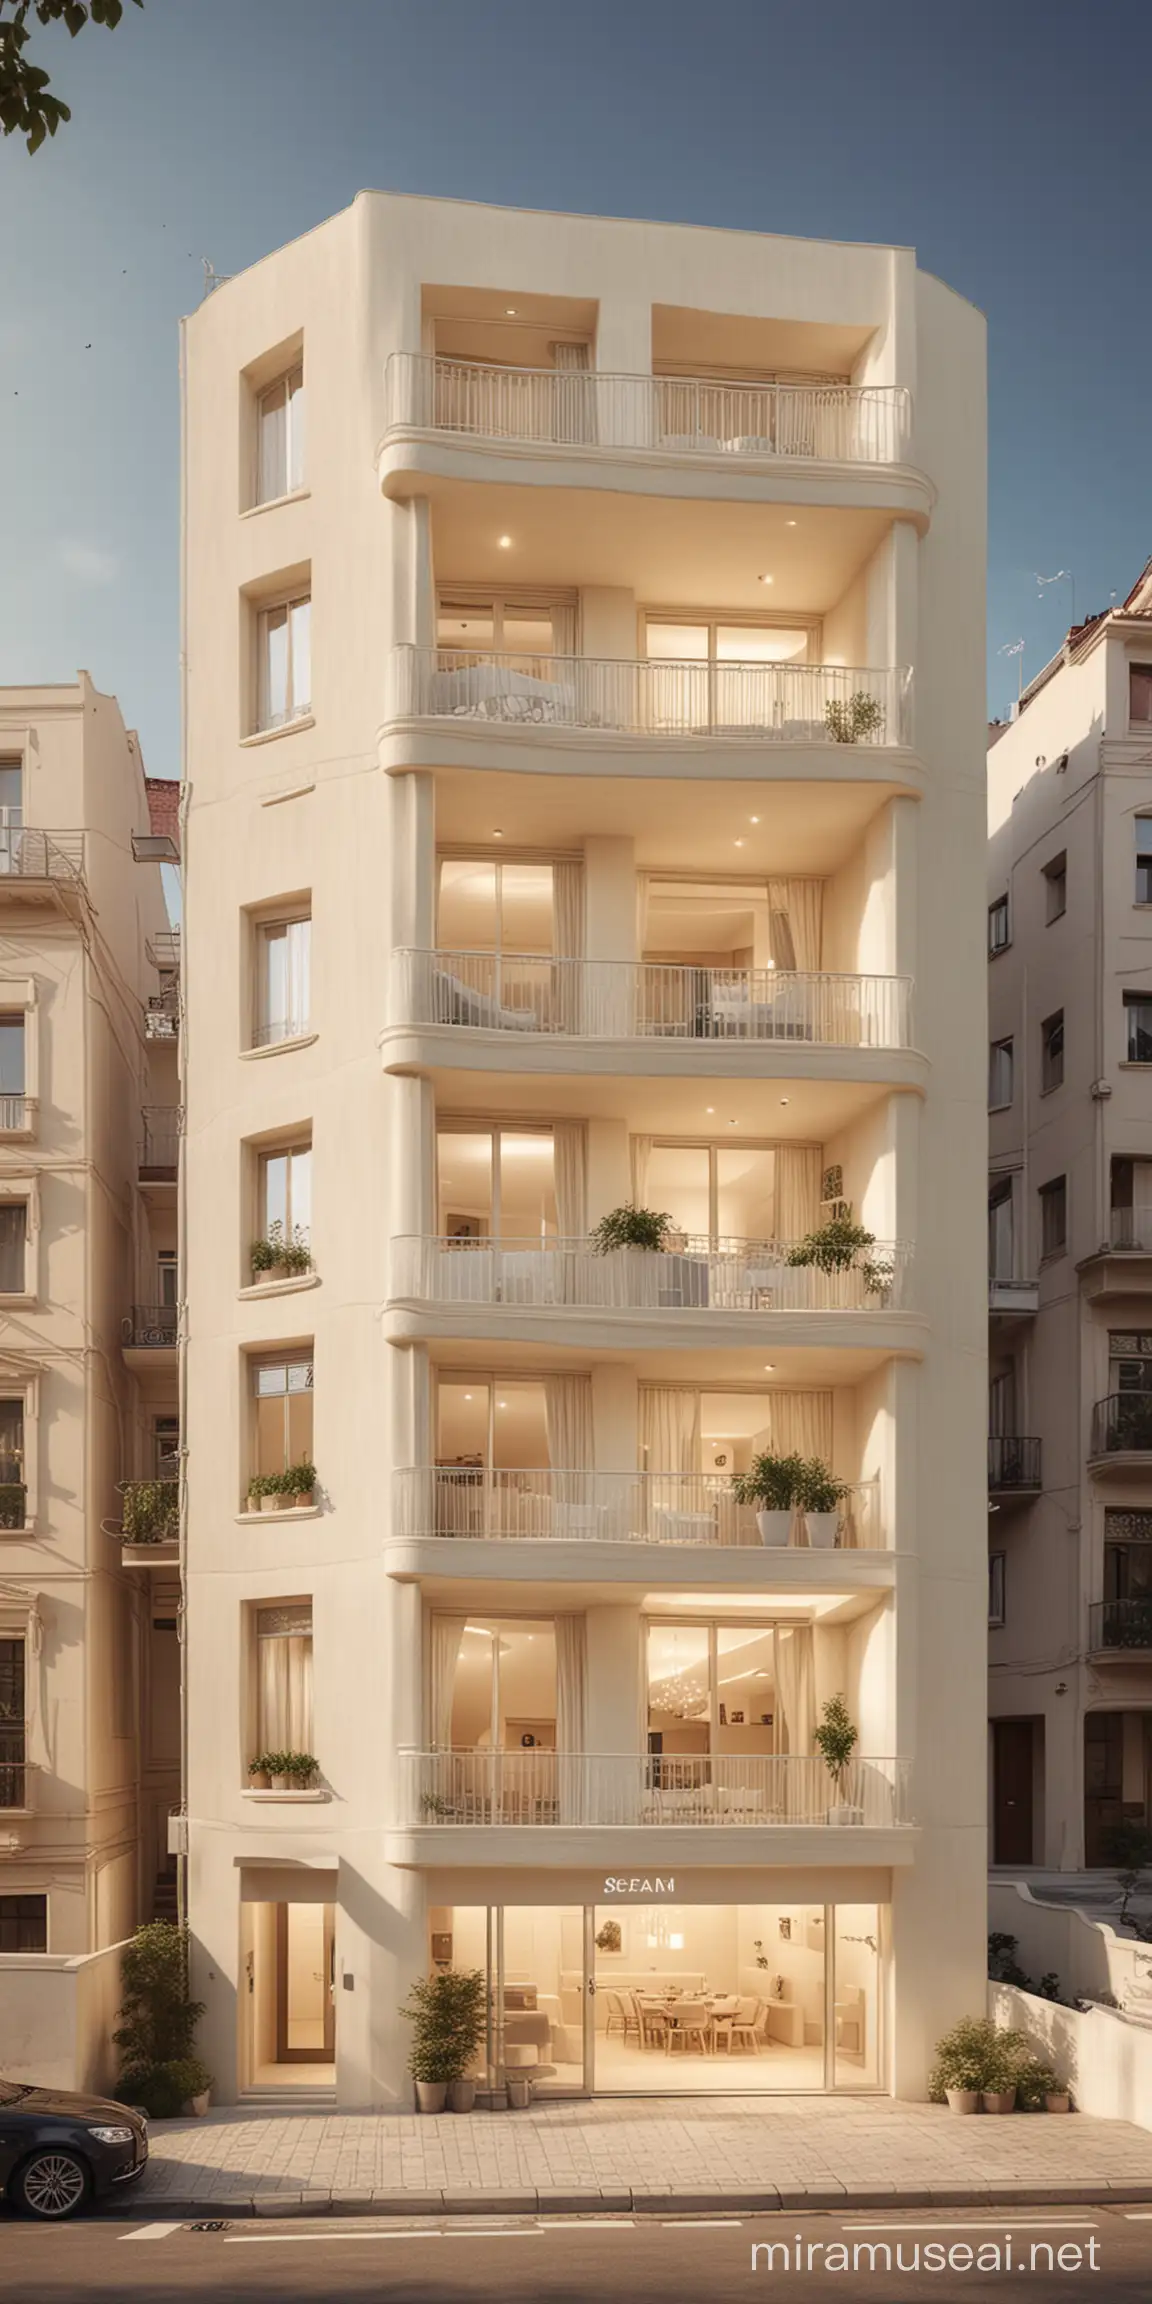 This buildingwith three floors and an underground parking basement. Its apartments are adorned in a soothing cream color, boasting impressive design with a touch of spirituality.Dominated by cream tones and soft lines, it creates an elegant and tranquil space, ideal for living and relaxation.